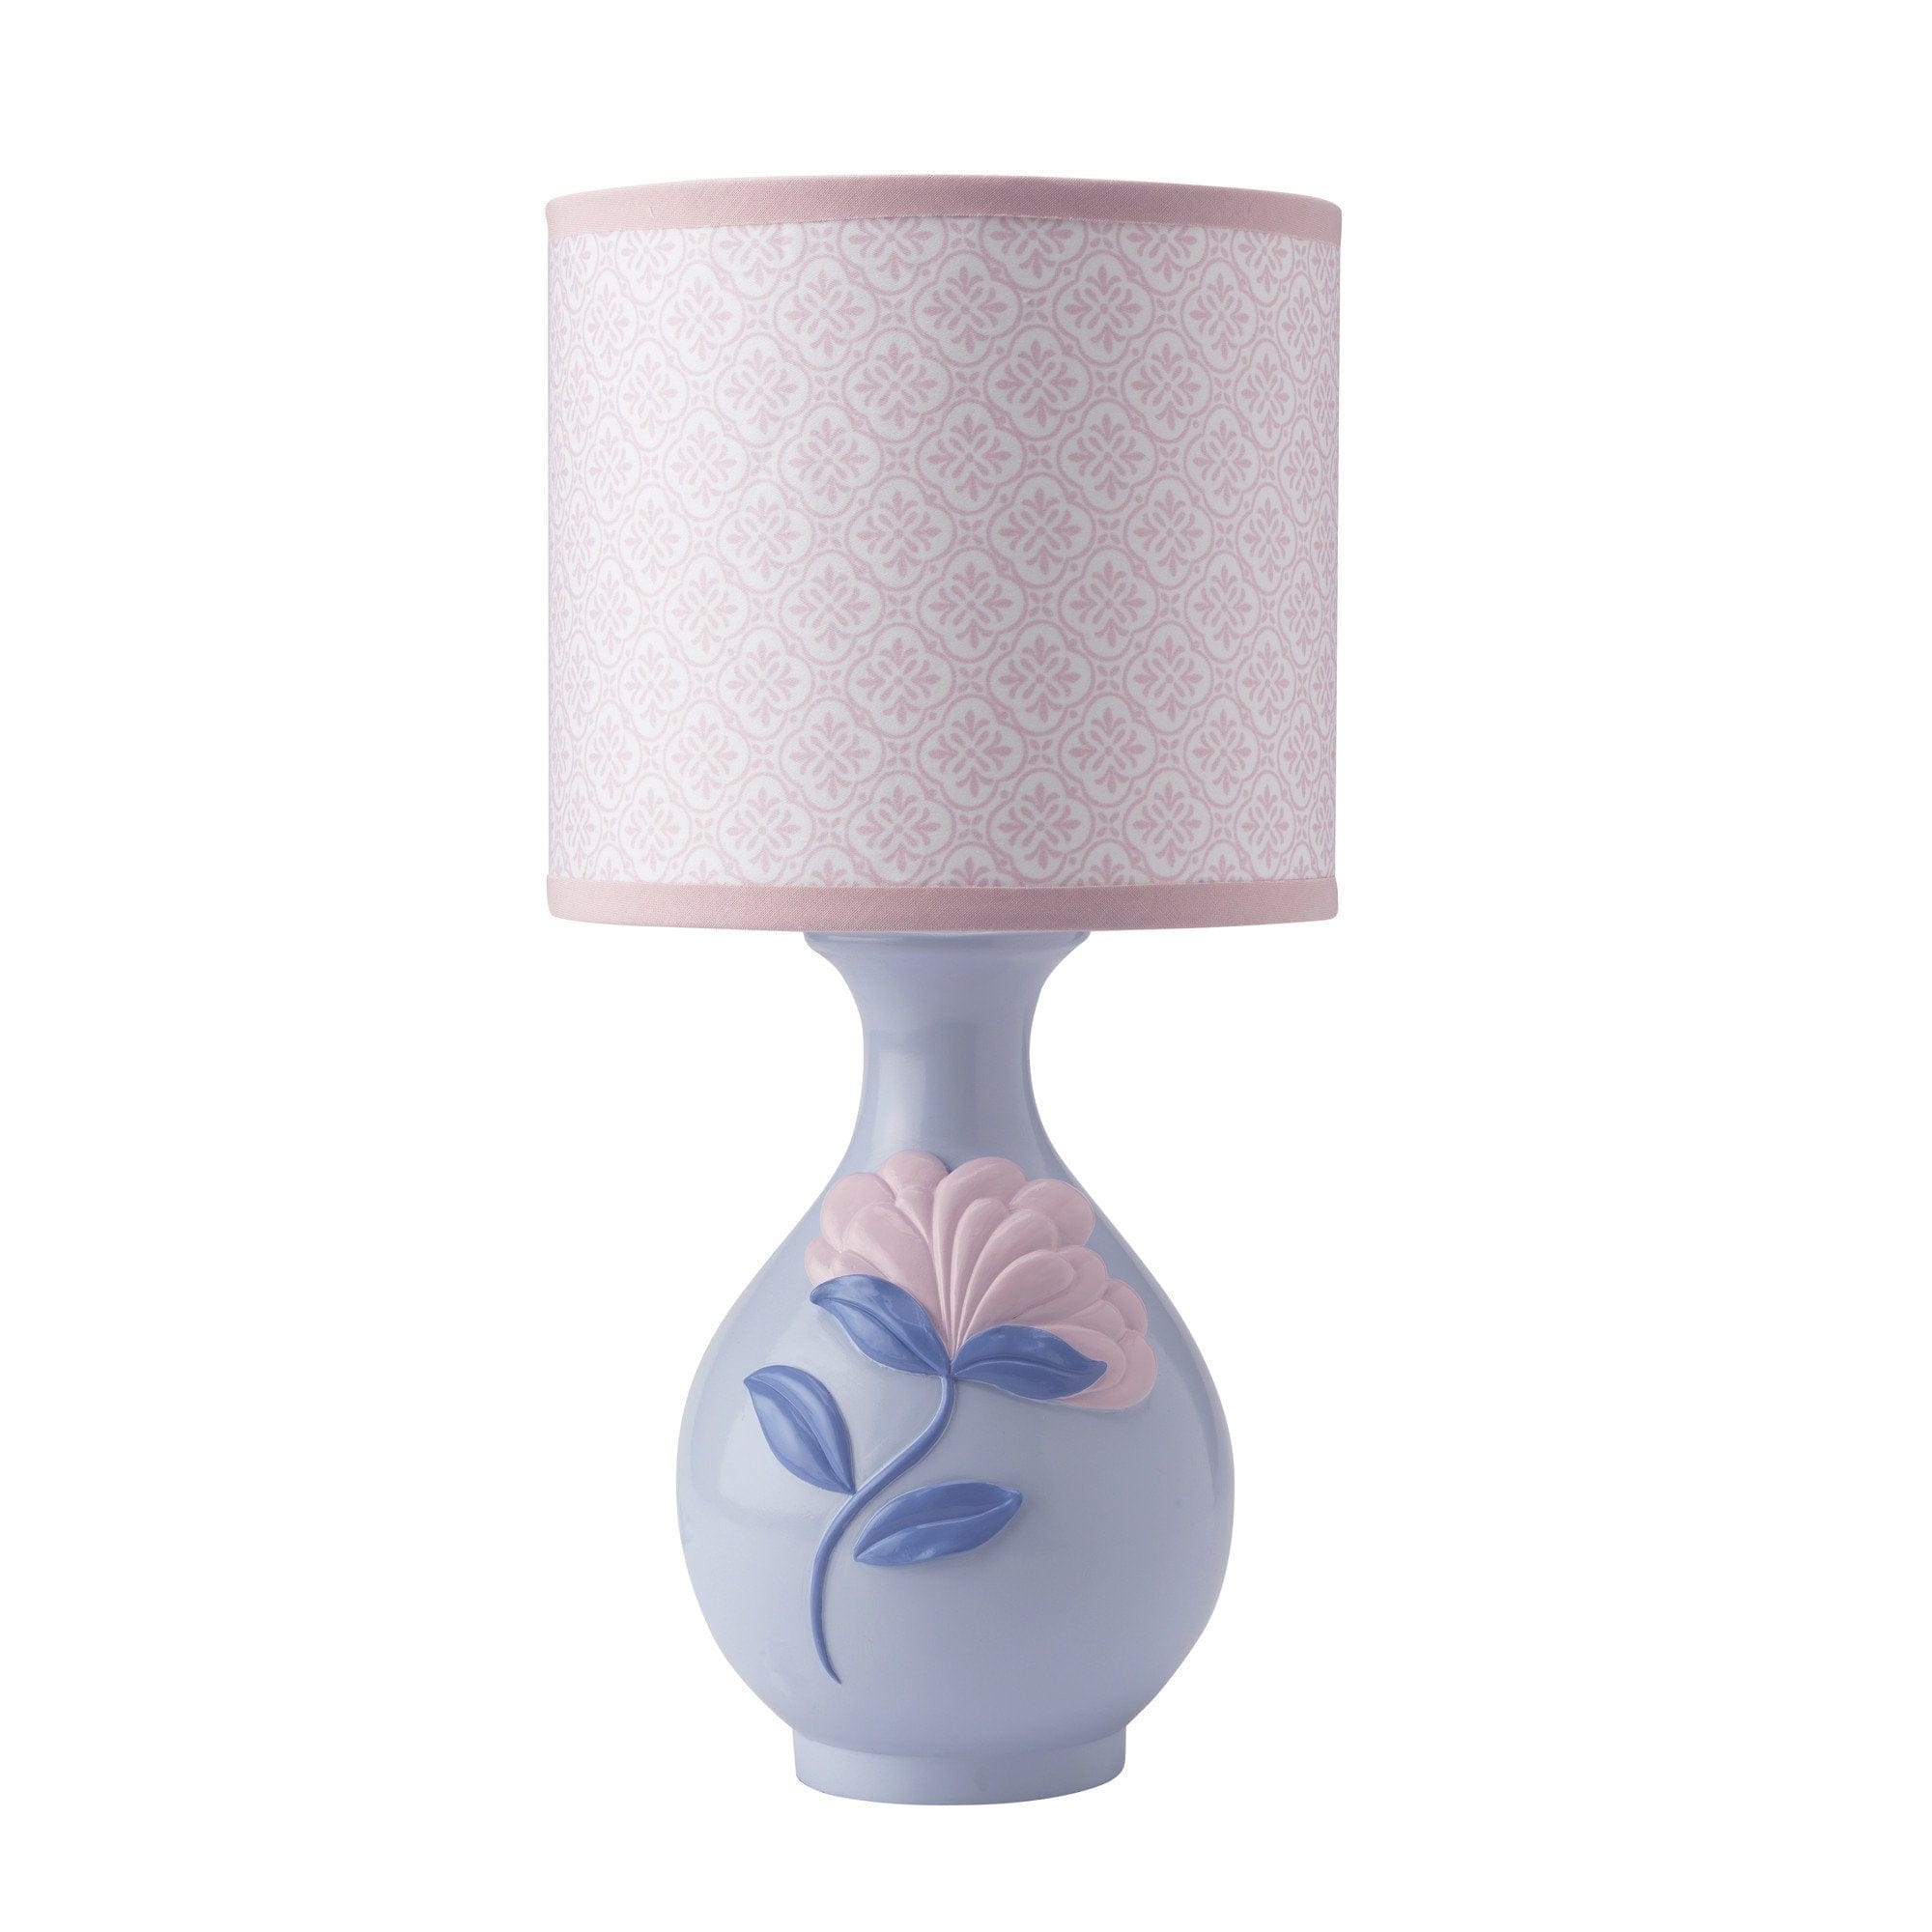 Lambs & Ivy Mackenzie Lamp: A beautifully shaped lamp base is decorated with a lovely sculpted pink flower and has a pretty patterned shade - 593024B